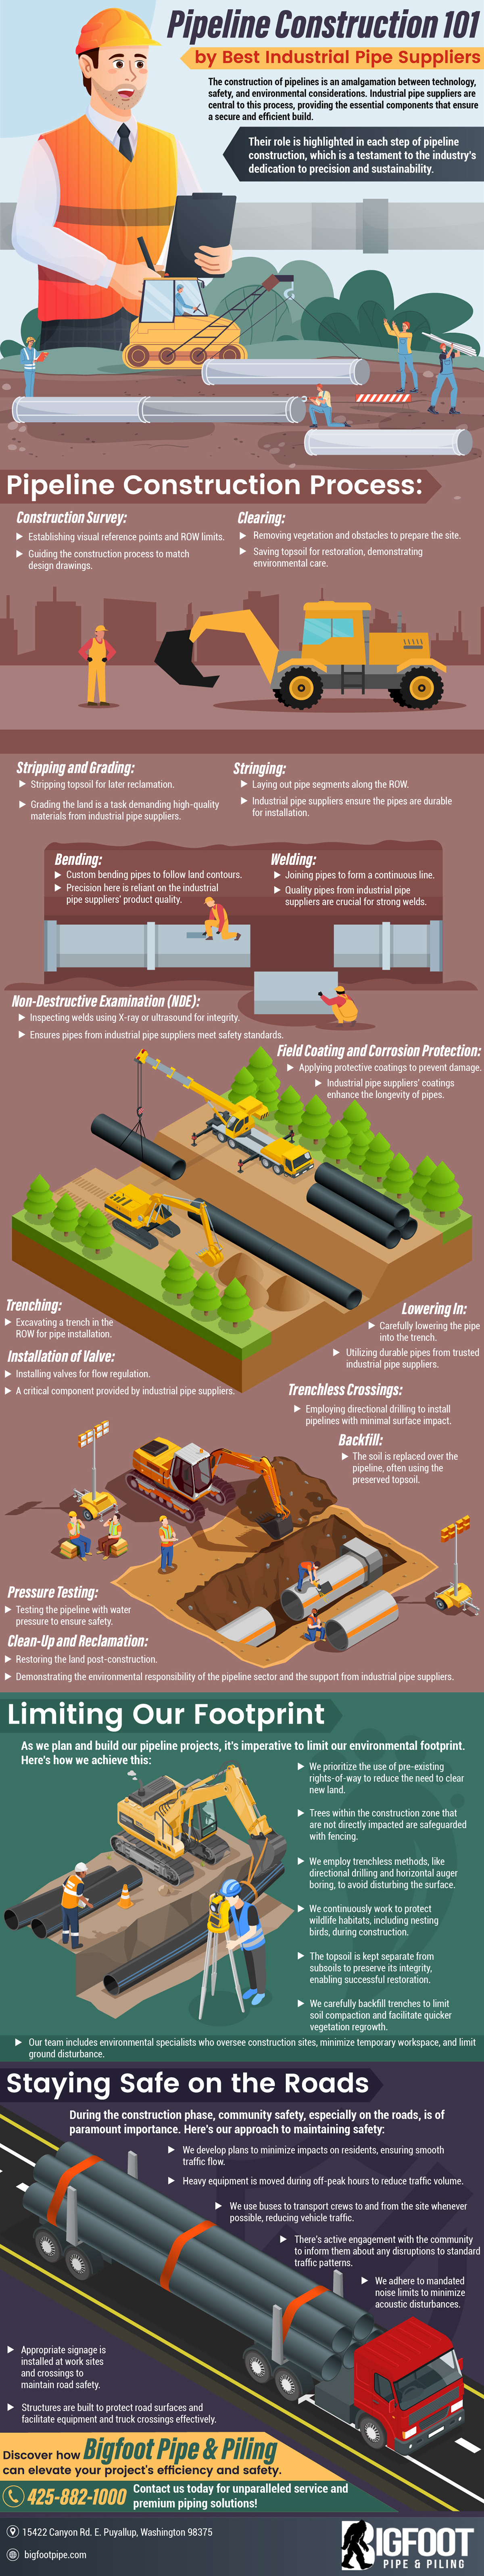 pipes steel industrial infographic Washington Gas oil